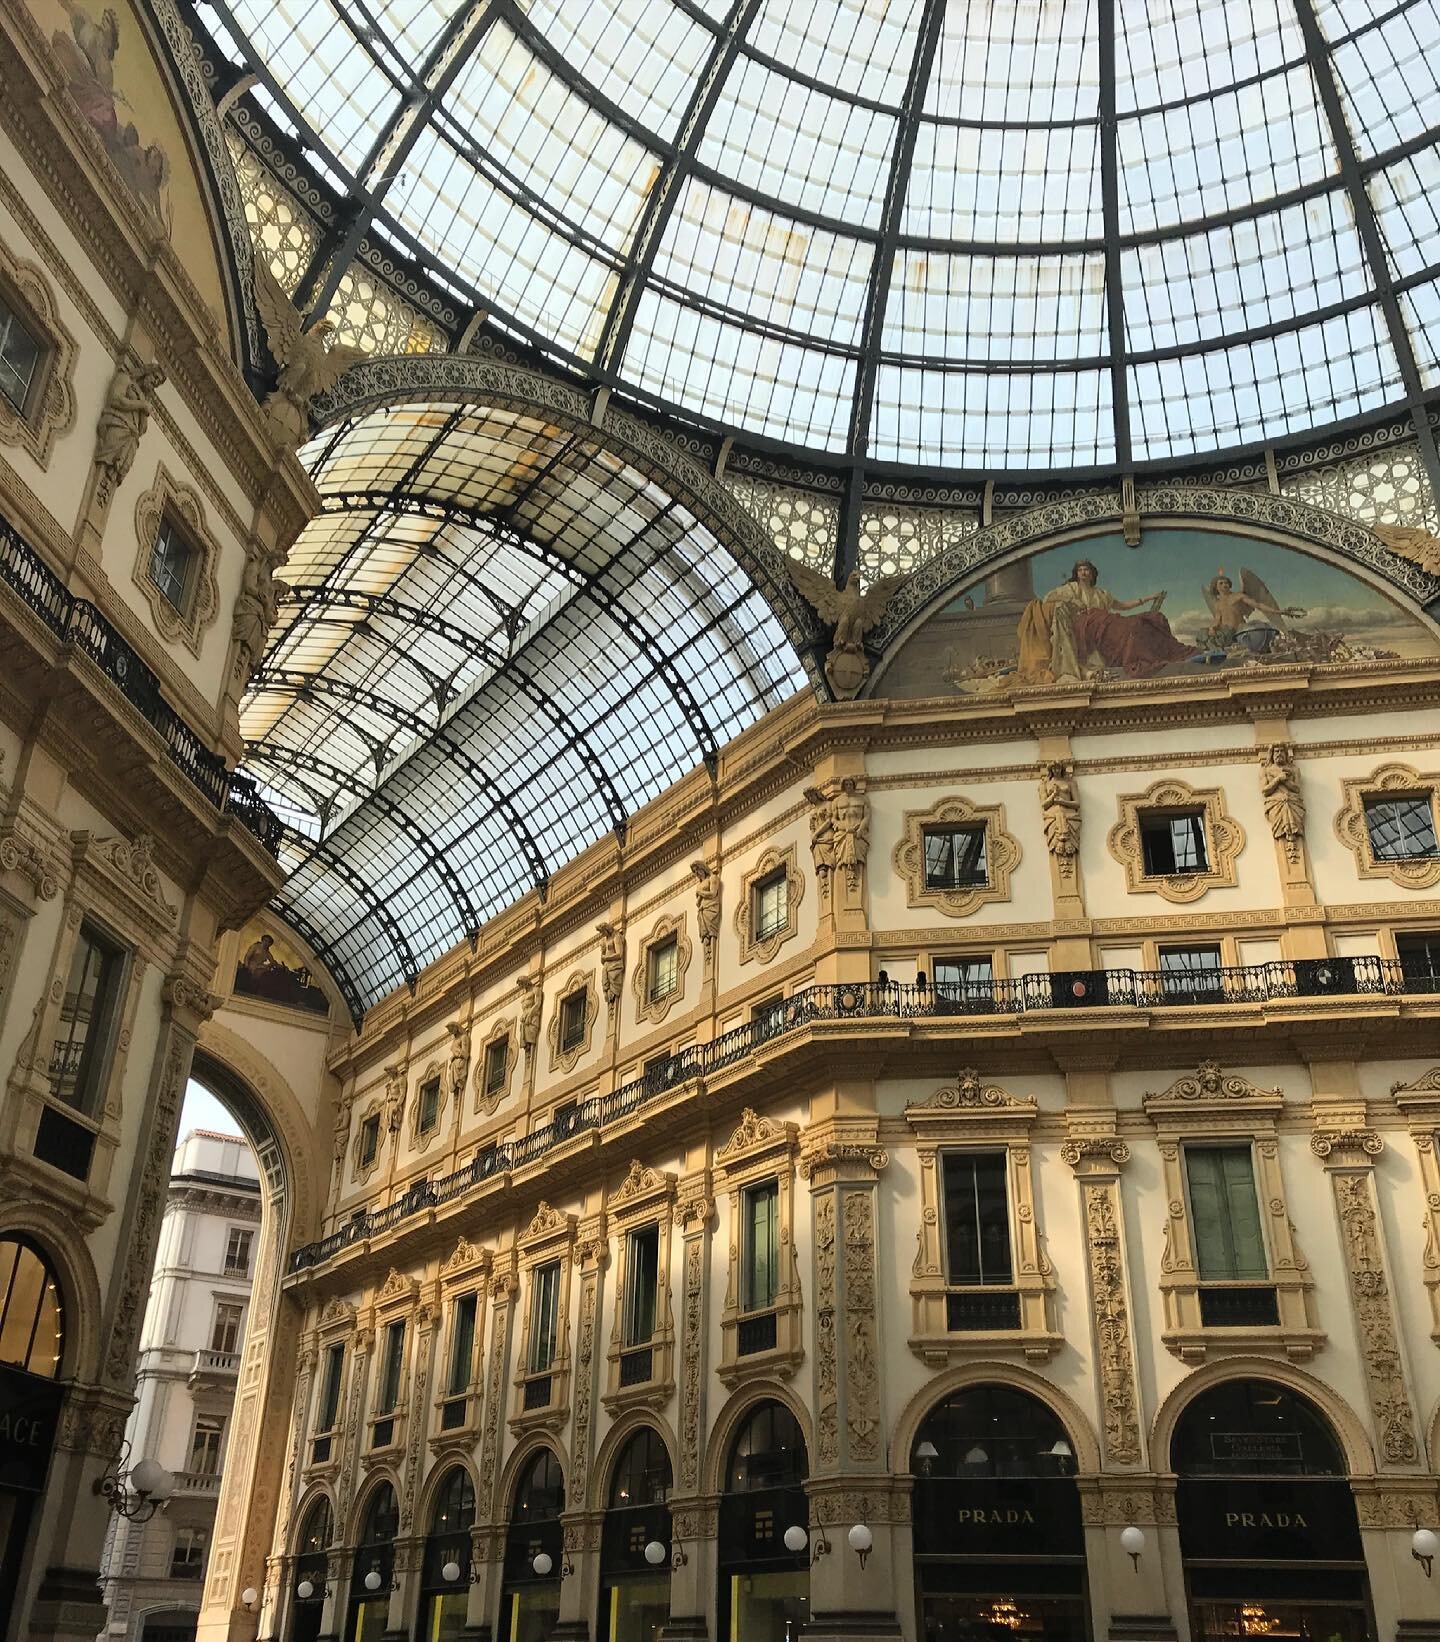 Milan. One of the fashion capitals of the world and home to some of the best dishes in Italy. 

The Galleria Vittorio Emanuele II is Italy&rsquo;s oldest shopping mall, dating back over 150 years. Though really, it&rsquo;s more like a luxurious shopp